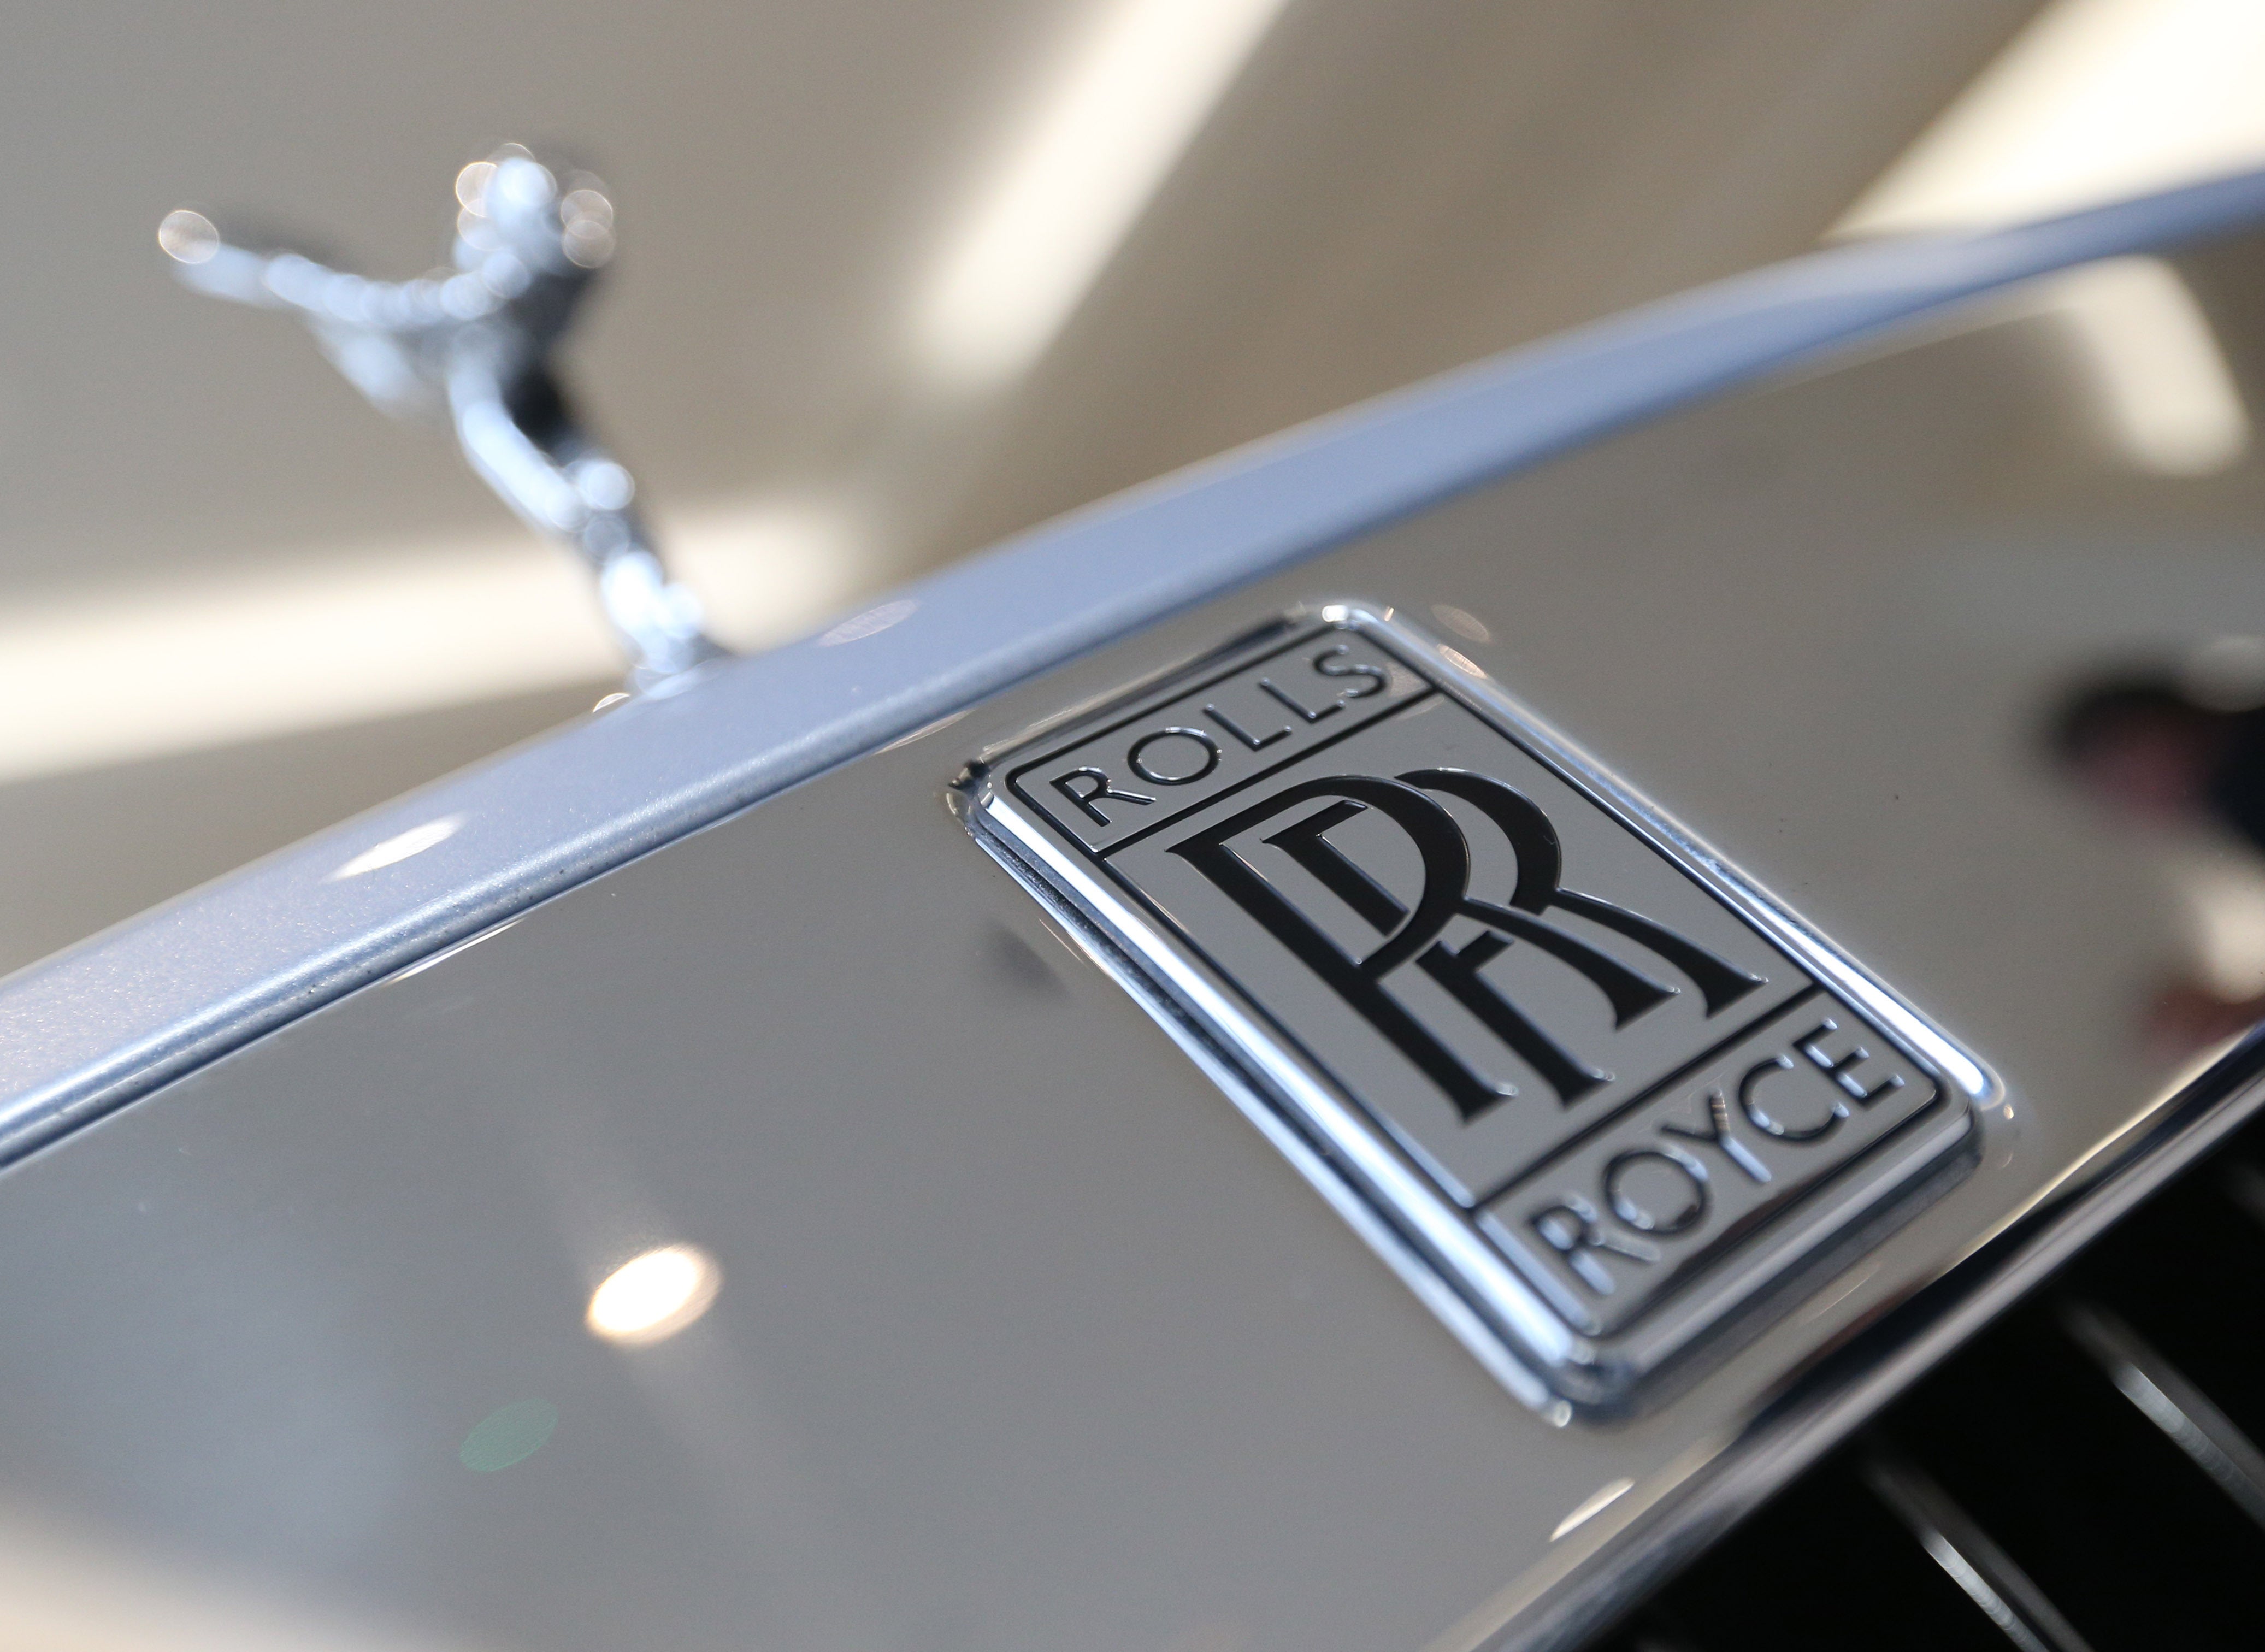 Rolls-Royce Motor Cars achieved a record year for sales in 2021, driven by the Ghost model (Jonathan Brady/PA)